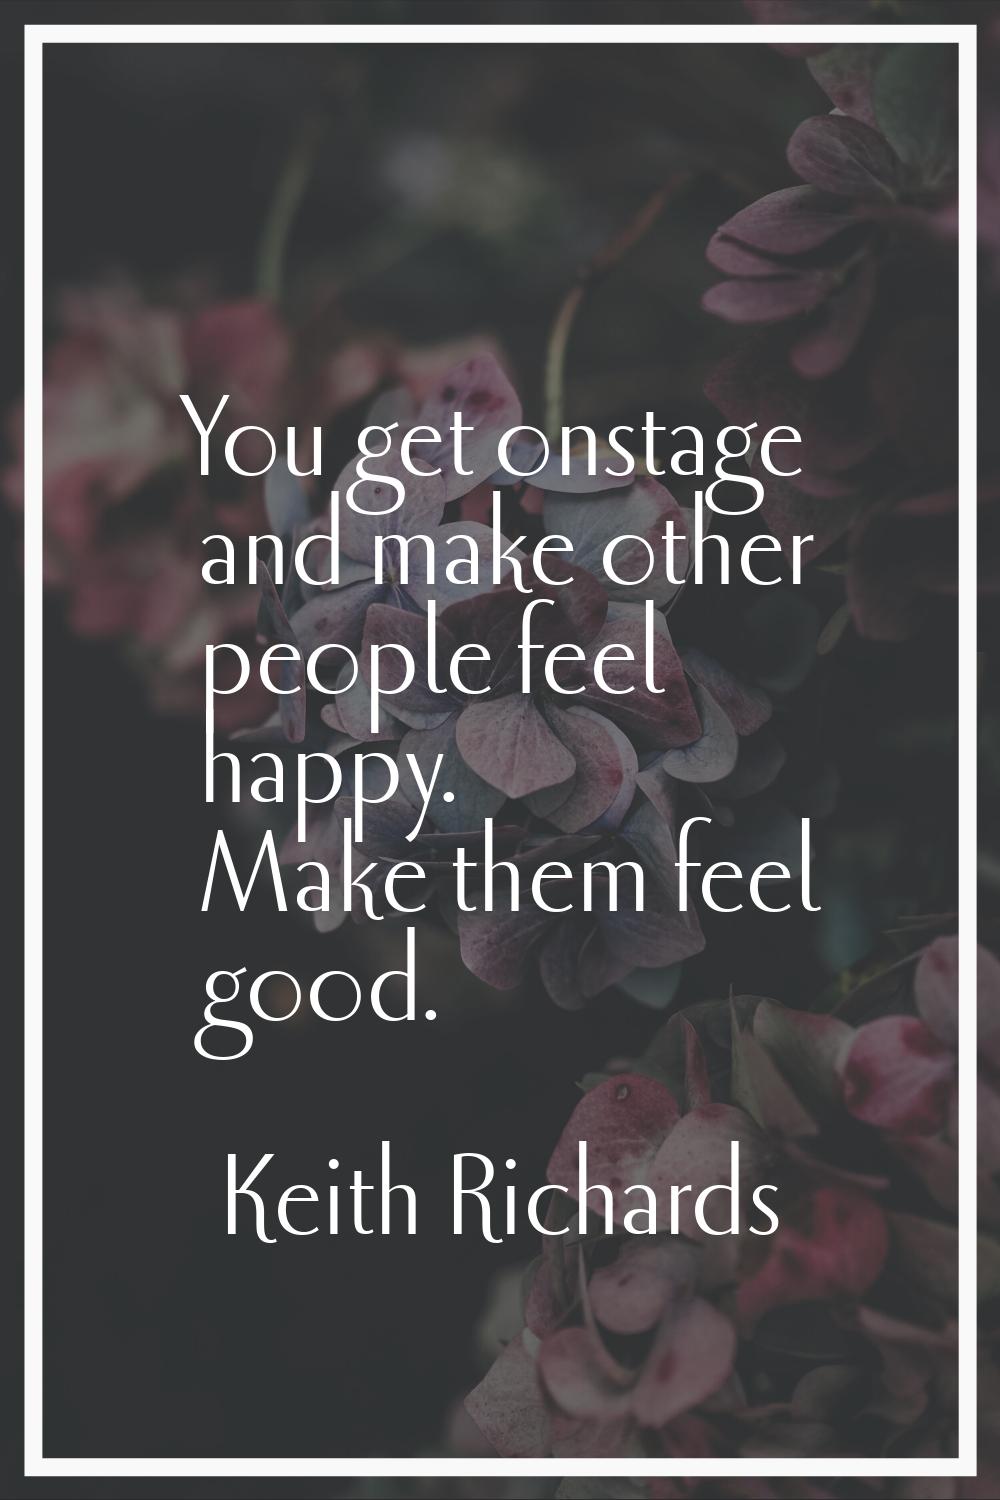 You get onstage and make other people feel happy. Make them feel good.